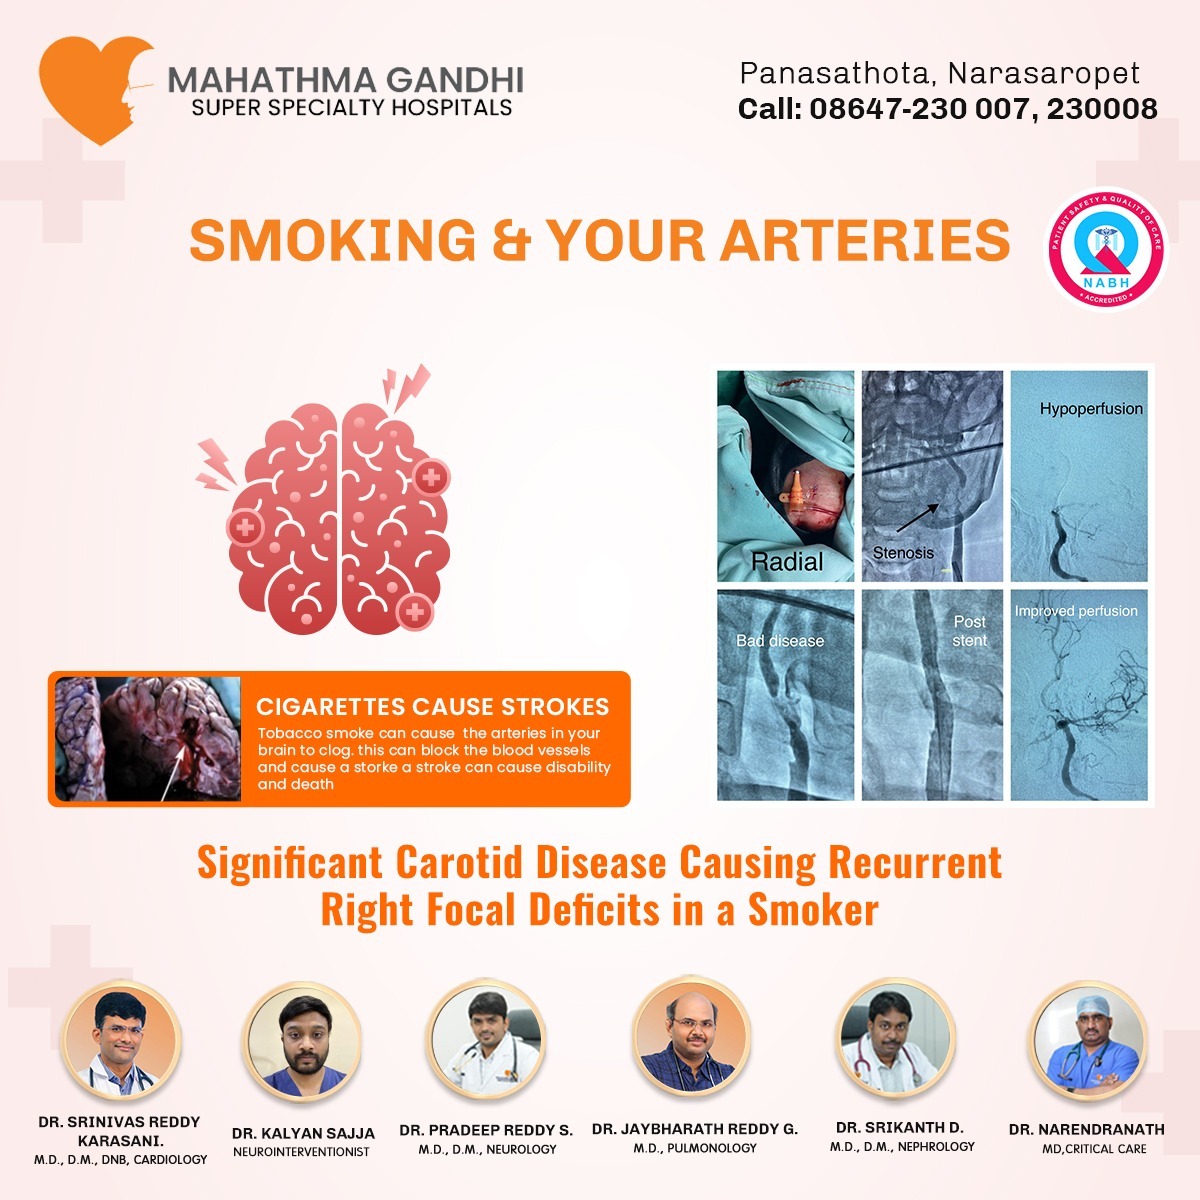 Significant carotid disease causing recurrent right focal deficits in a smoker. 

#Pulmonology #Pulmonologydoctors #lungs #lungscare #healthylungs #quitsmoking #smoking #healthyhabits #life #healthylife #hospitals #PulmonologyHospitals #narasaraopeta #narasaraopet #palnadu